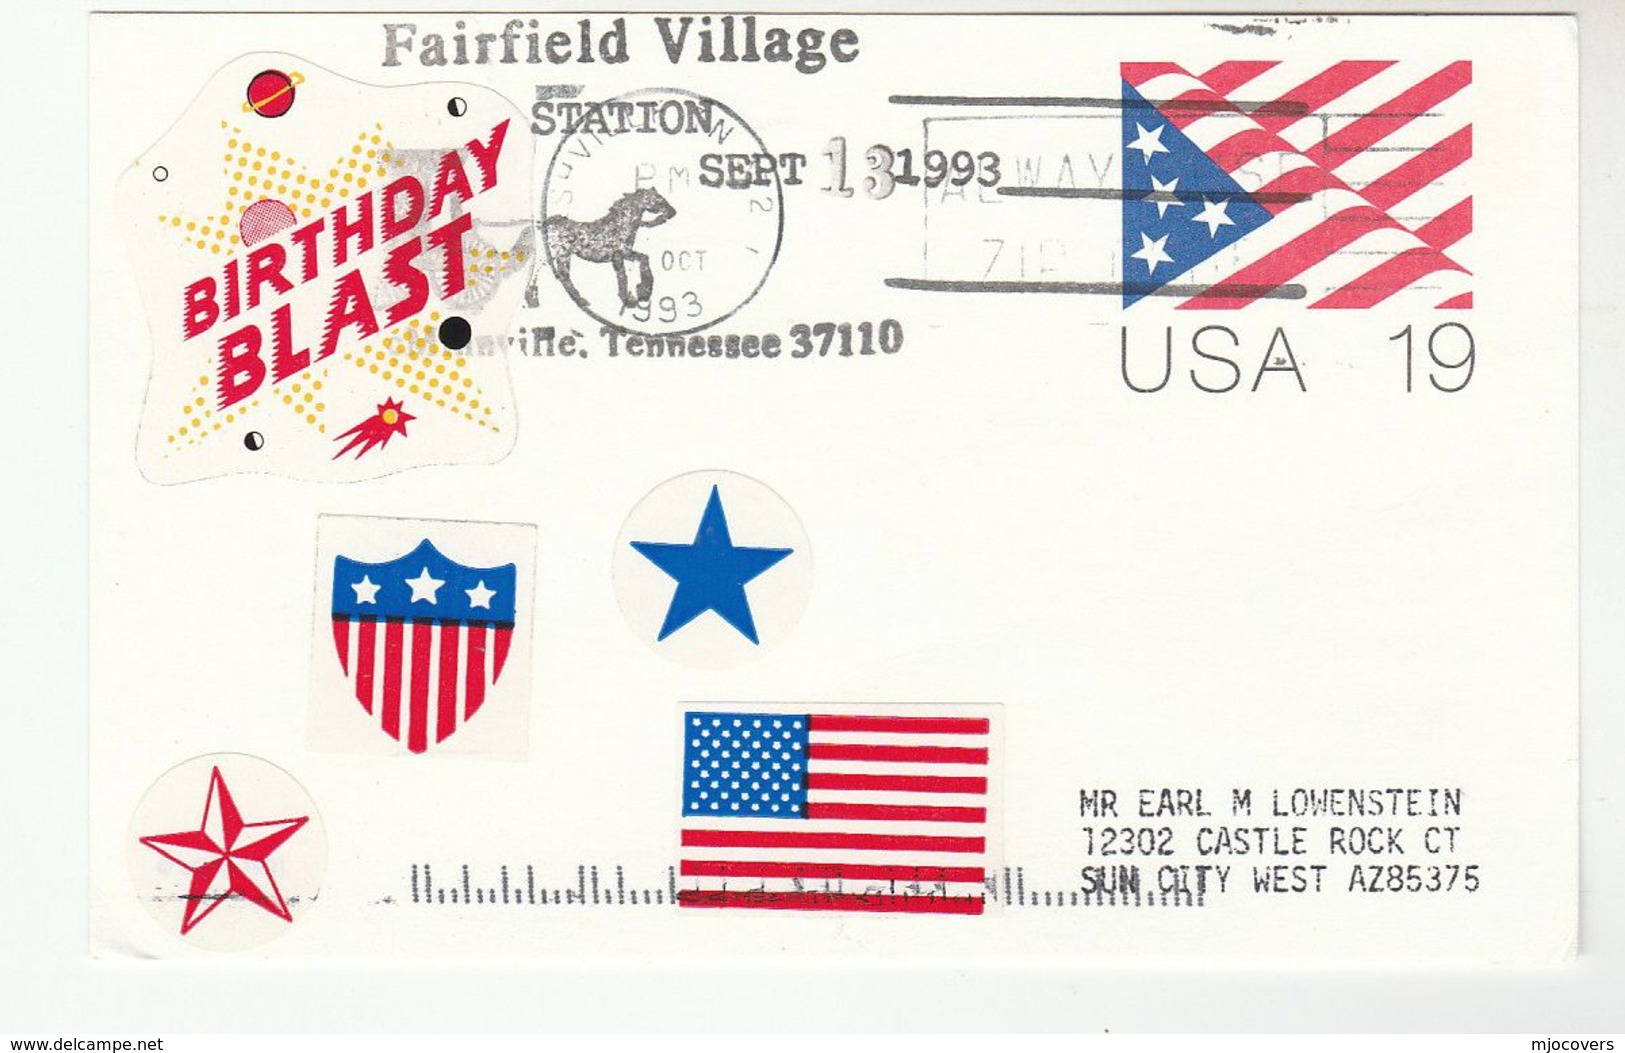 1993 FAIRFIED VILLAGE HORSE EVENT COVER Postal STATIONERY CARD Usa Stamps Horses - Chevaux